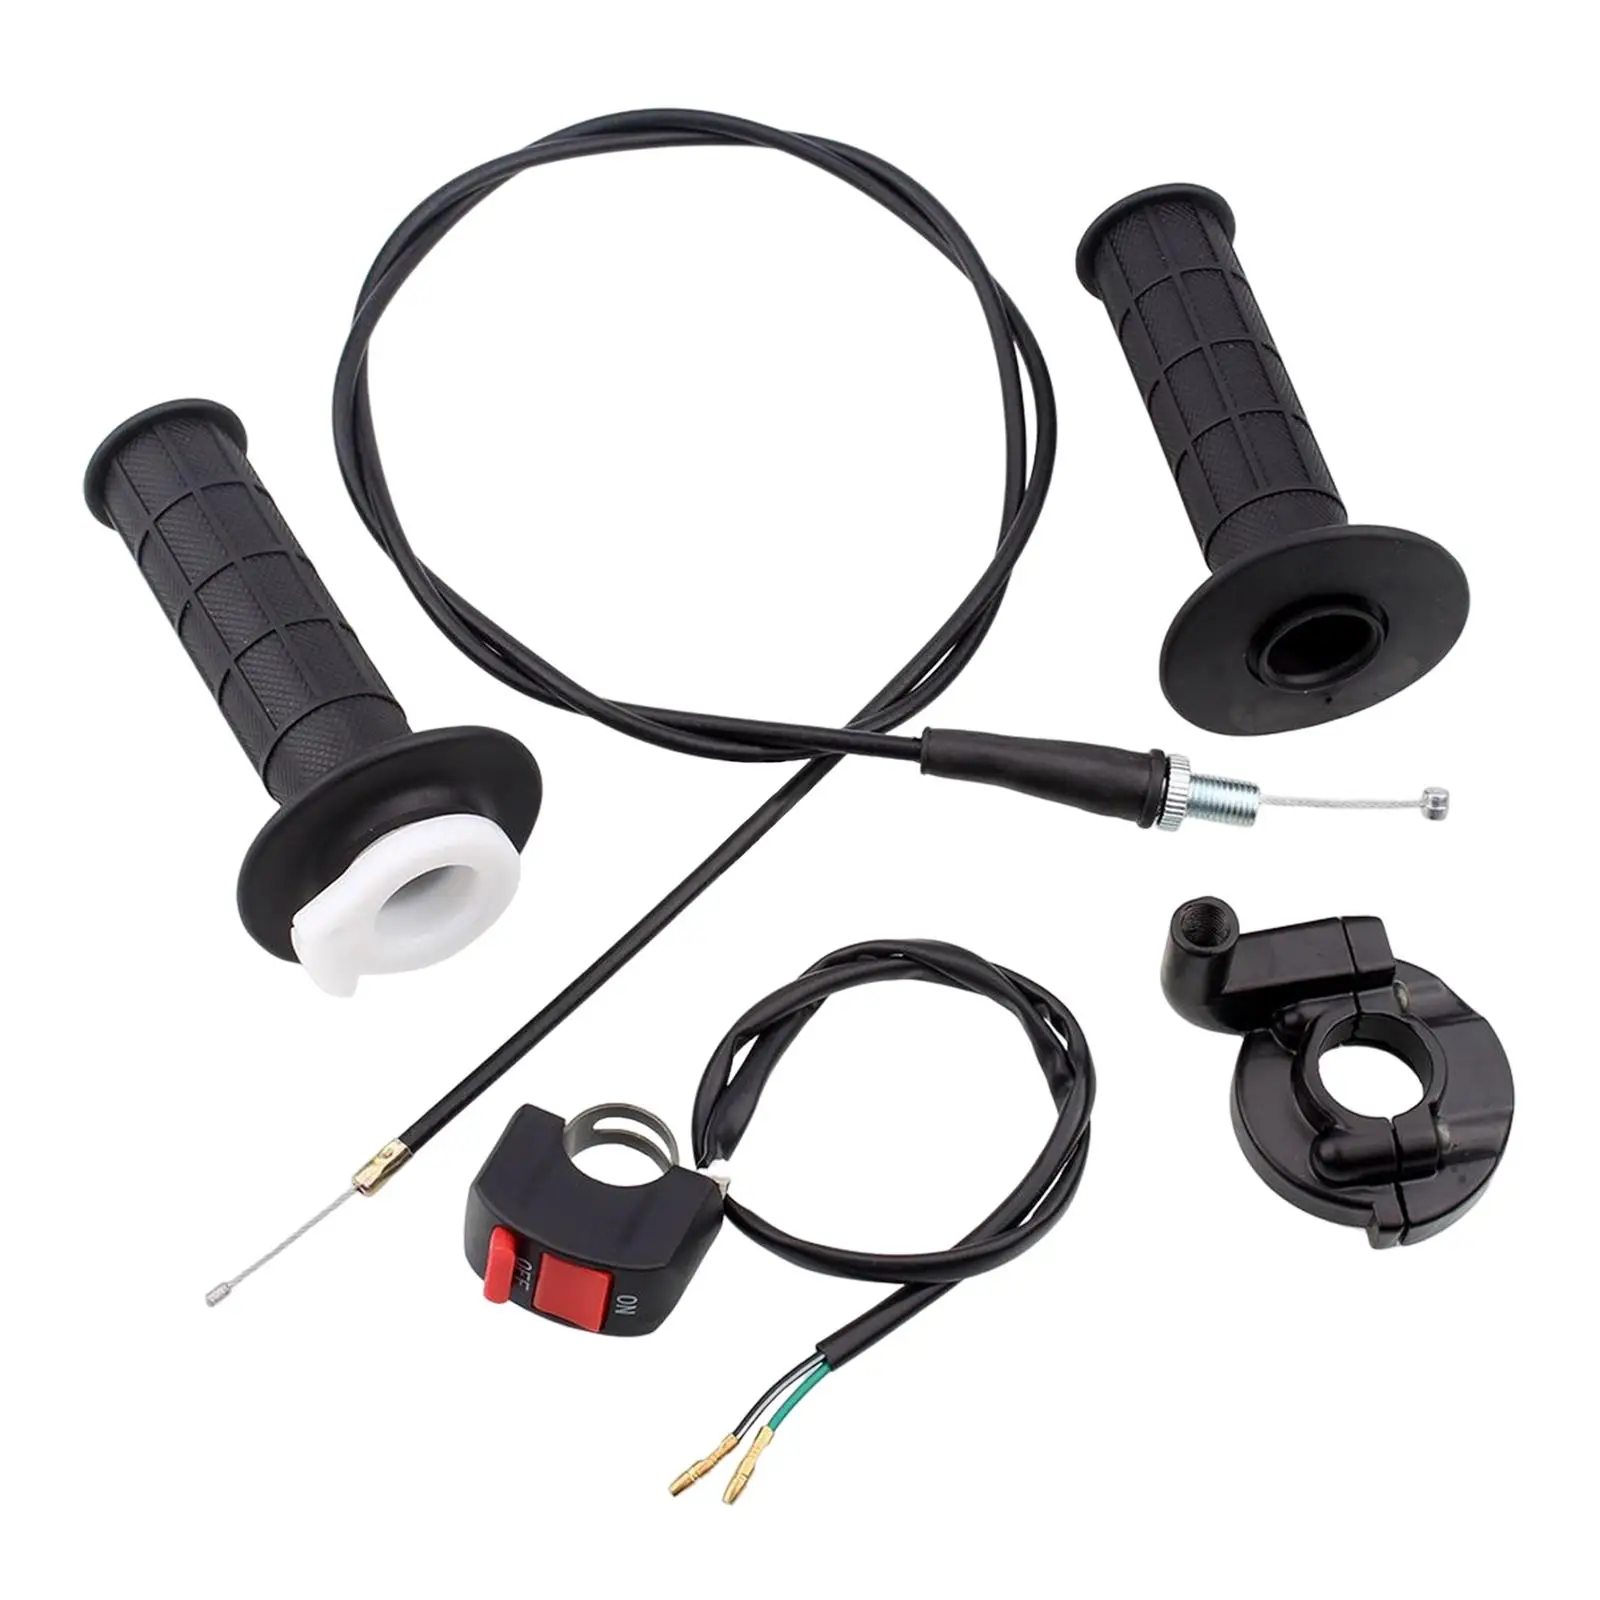 Throttle Accelerator Handle and Cable Kit for 50cc 150cc 250cc Mini Bike Easy Installation Direct Replaces Professional